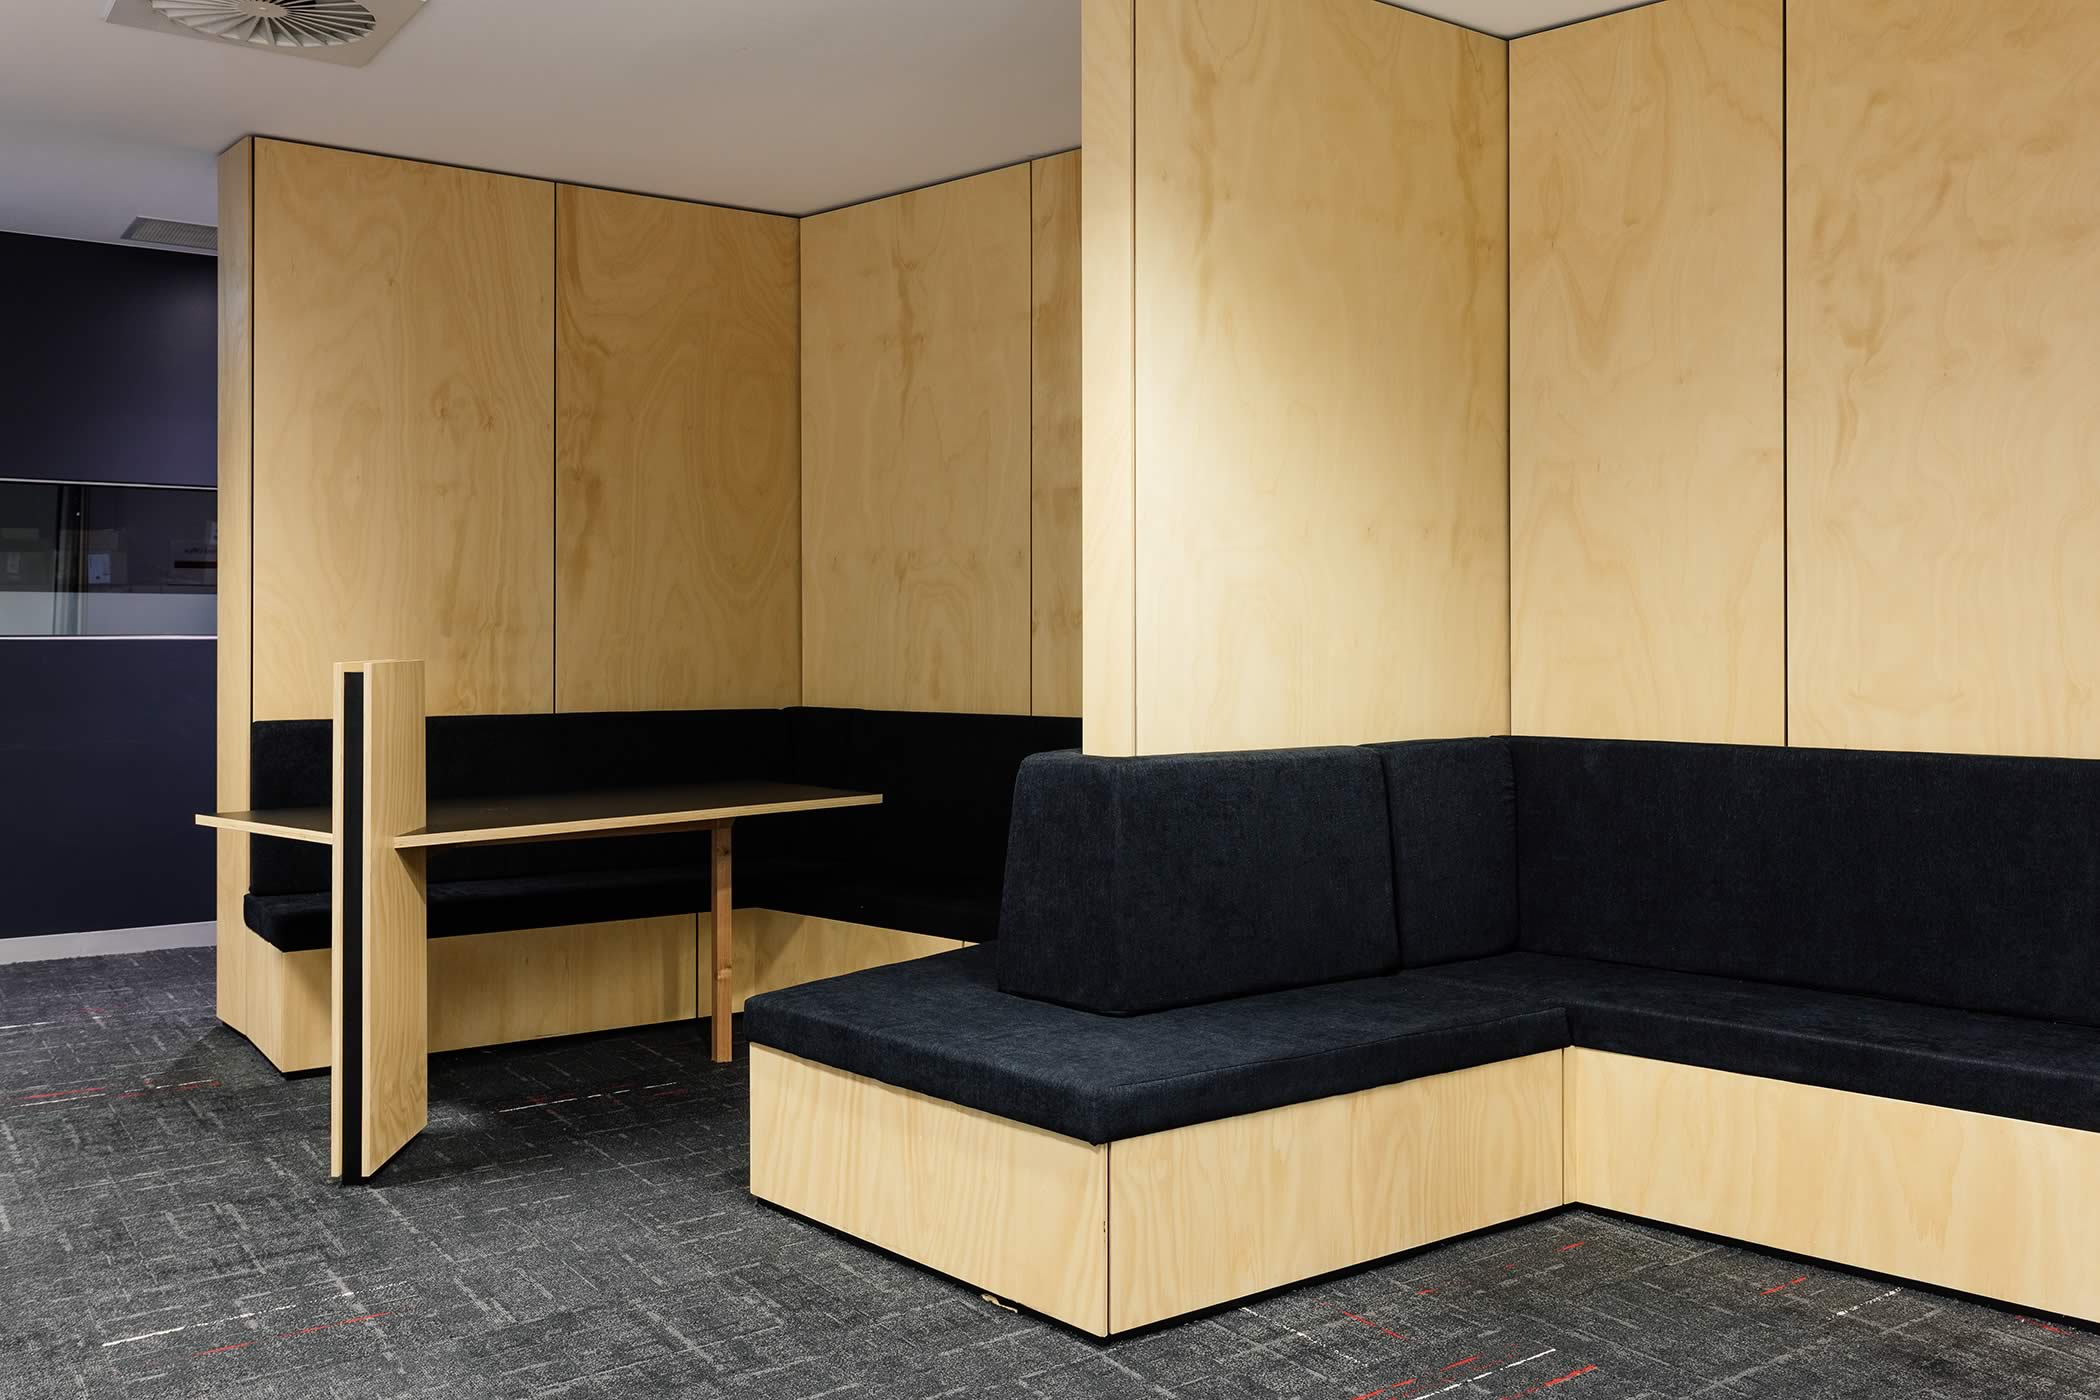 The Media School – University of Tasmania: Built–in alcove seating introduces natural timber for a friendly environment where students congregate for pre and post lesson discussion. Photo by Adam Gibson.